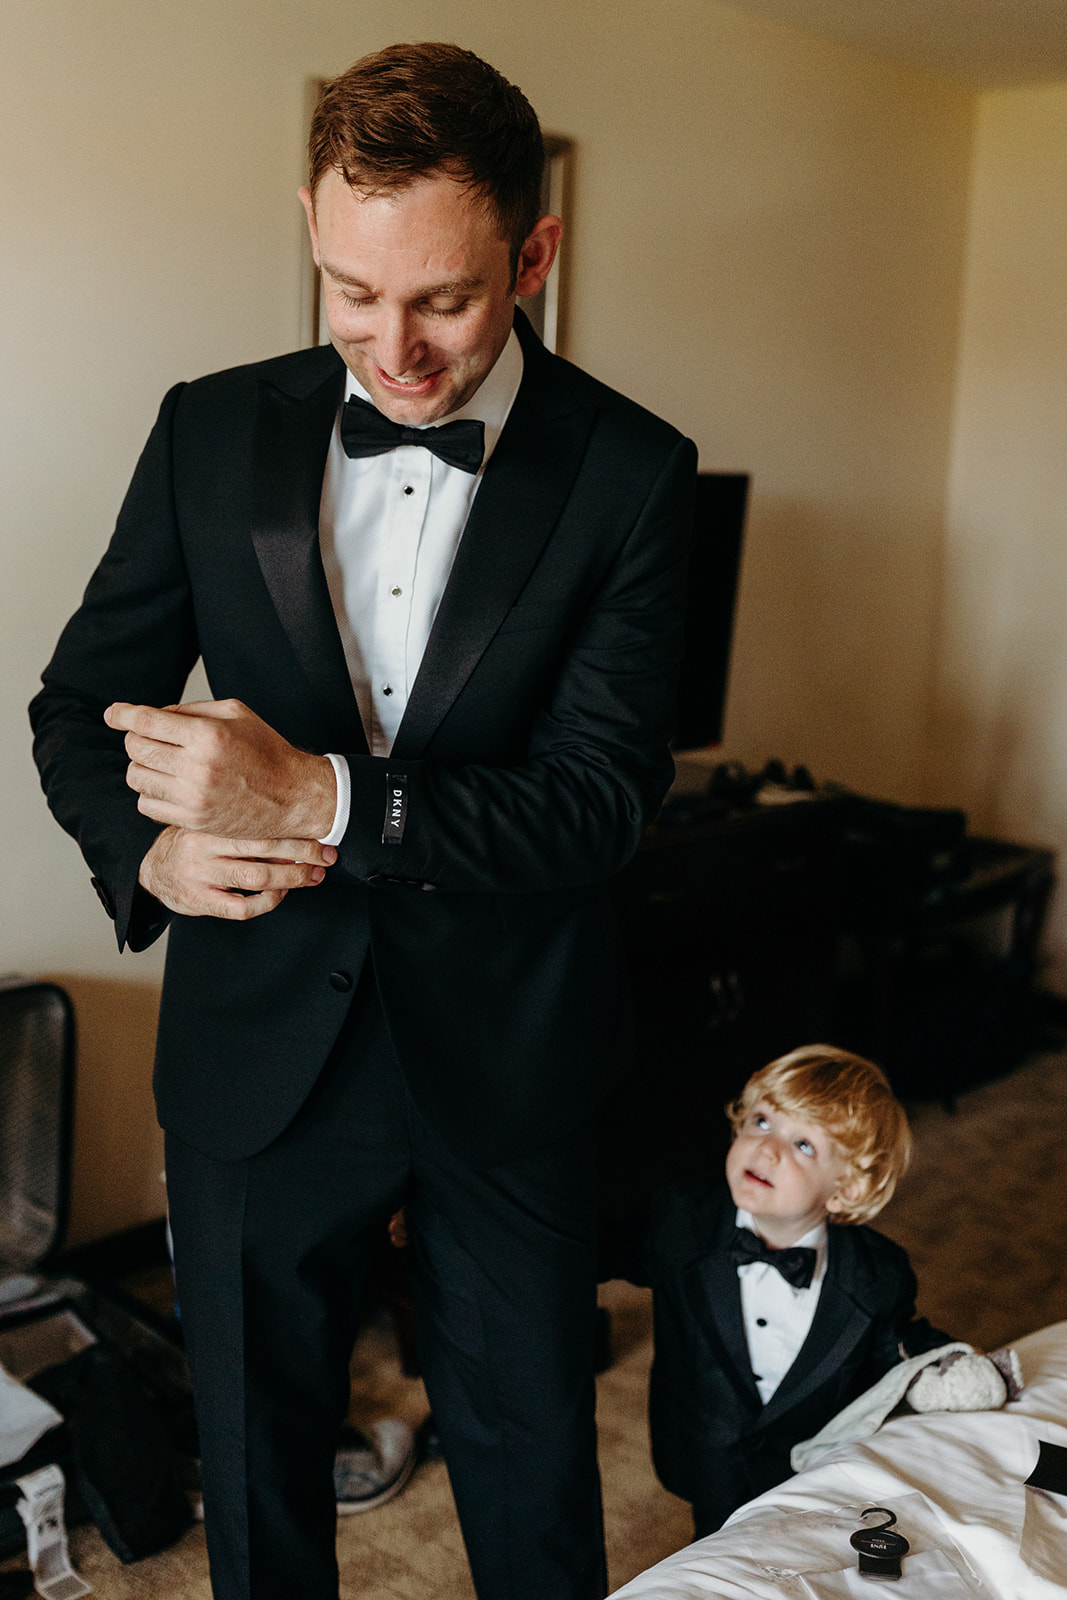 Groom gets ready in black tie as son looks at him 